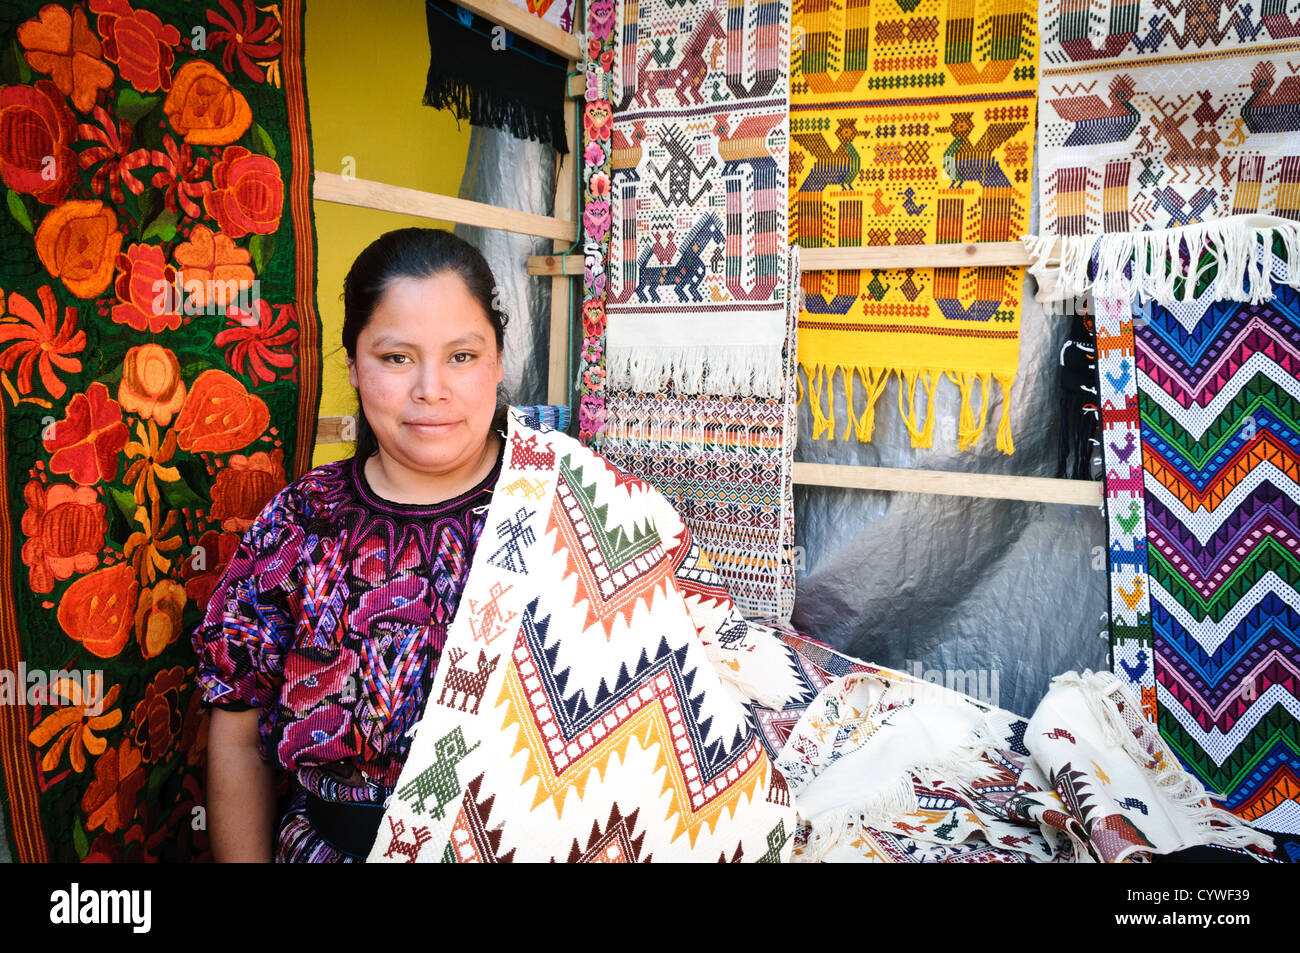 CHICHICASTENANGO, Guatemala - A local woman posing with her woven textiles at the Chichi market. Chichicastenango is an indigenous Maya town in the Guatemalan highlands about 90 miles northwest of Guatemala City and at an elevation of nearly 6,500 feet. It is most famous for its markets on Sundays and Thursdays. Stock Photo